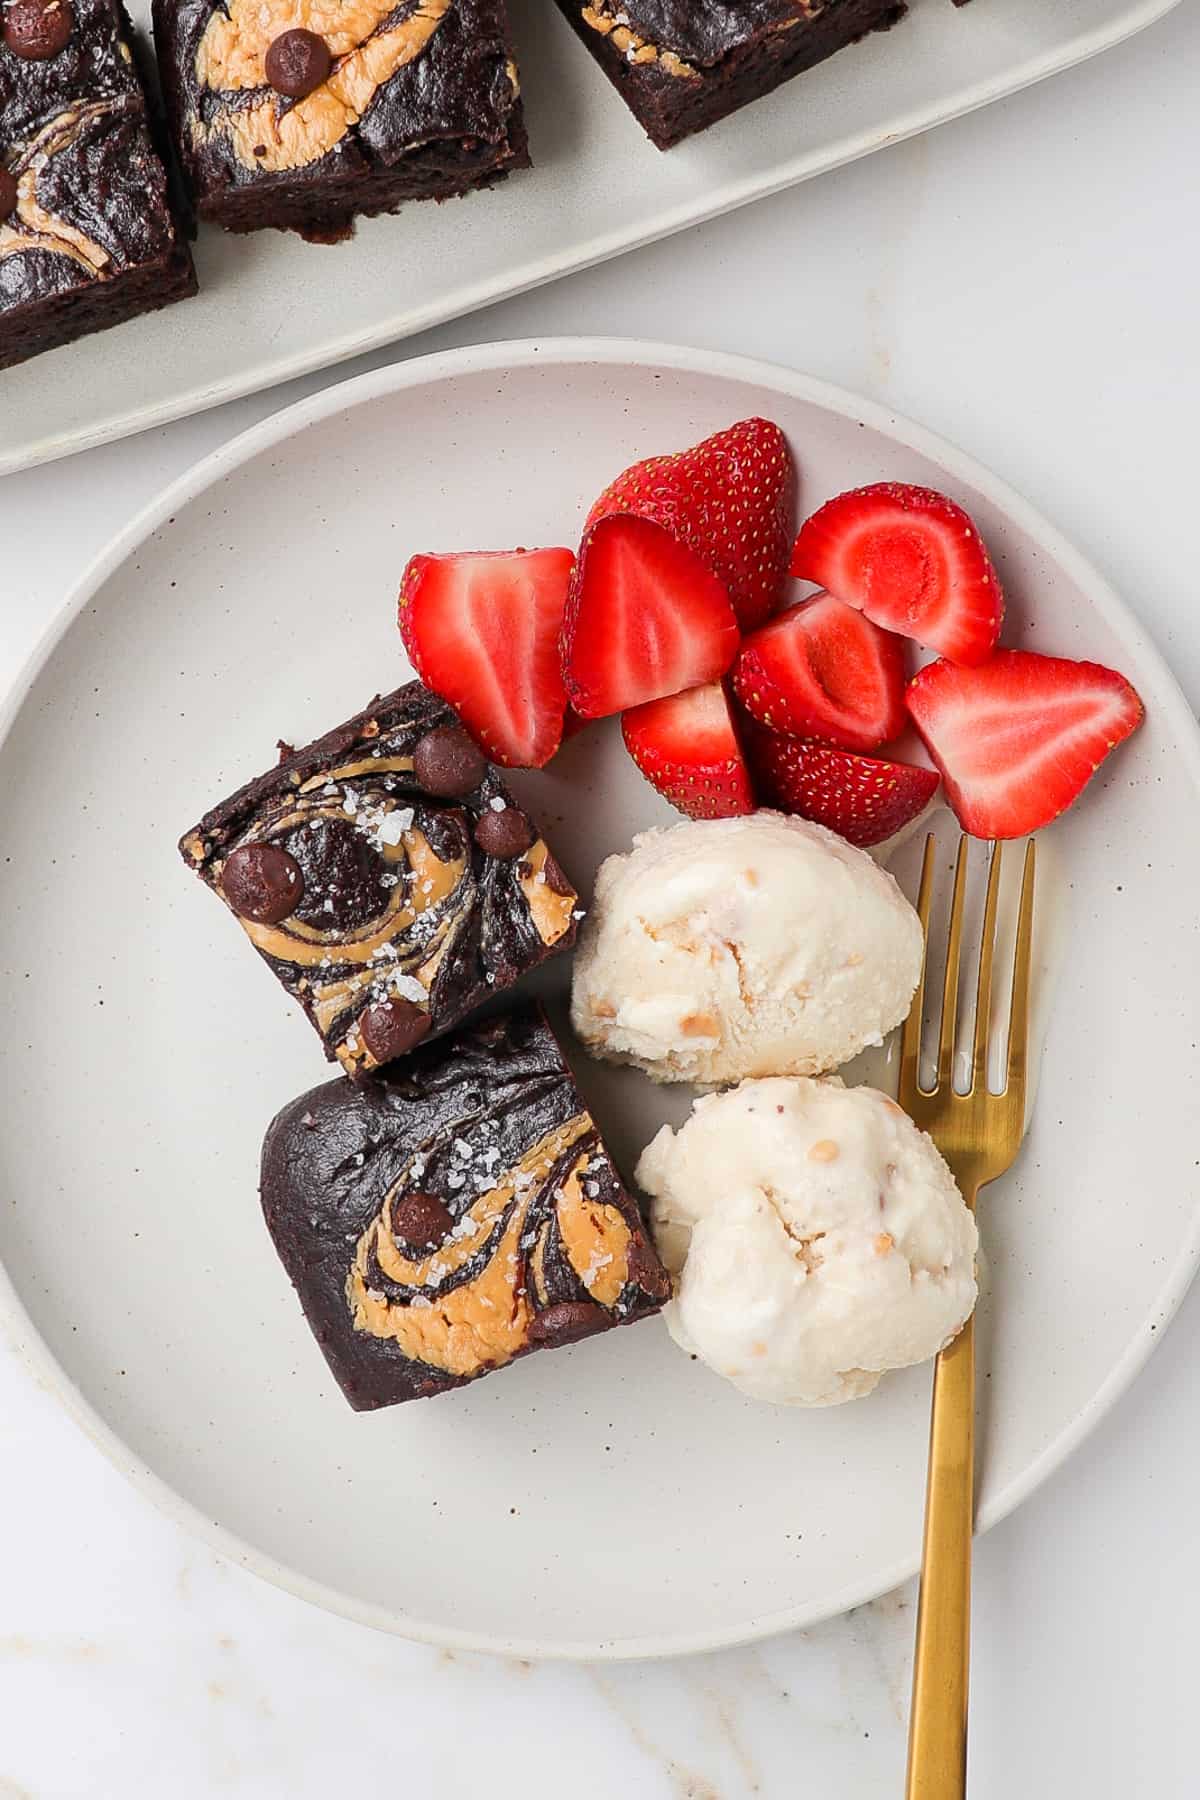 Brownies on a plate with ice cream and strawberries.